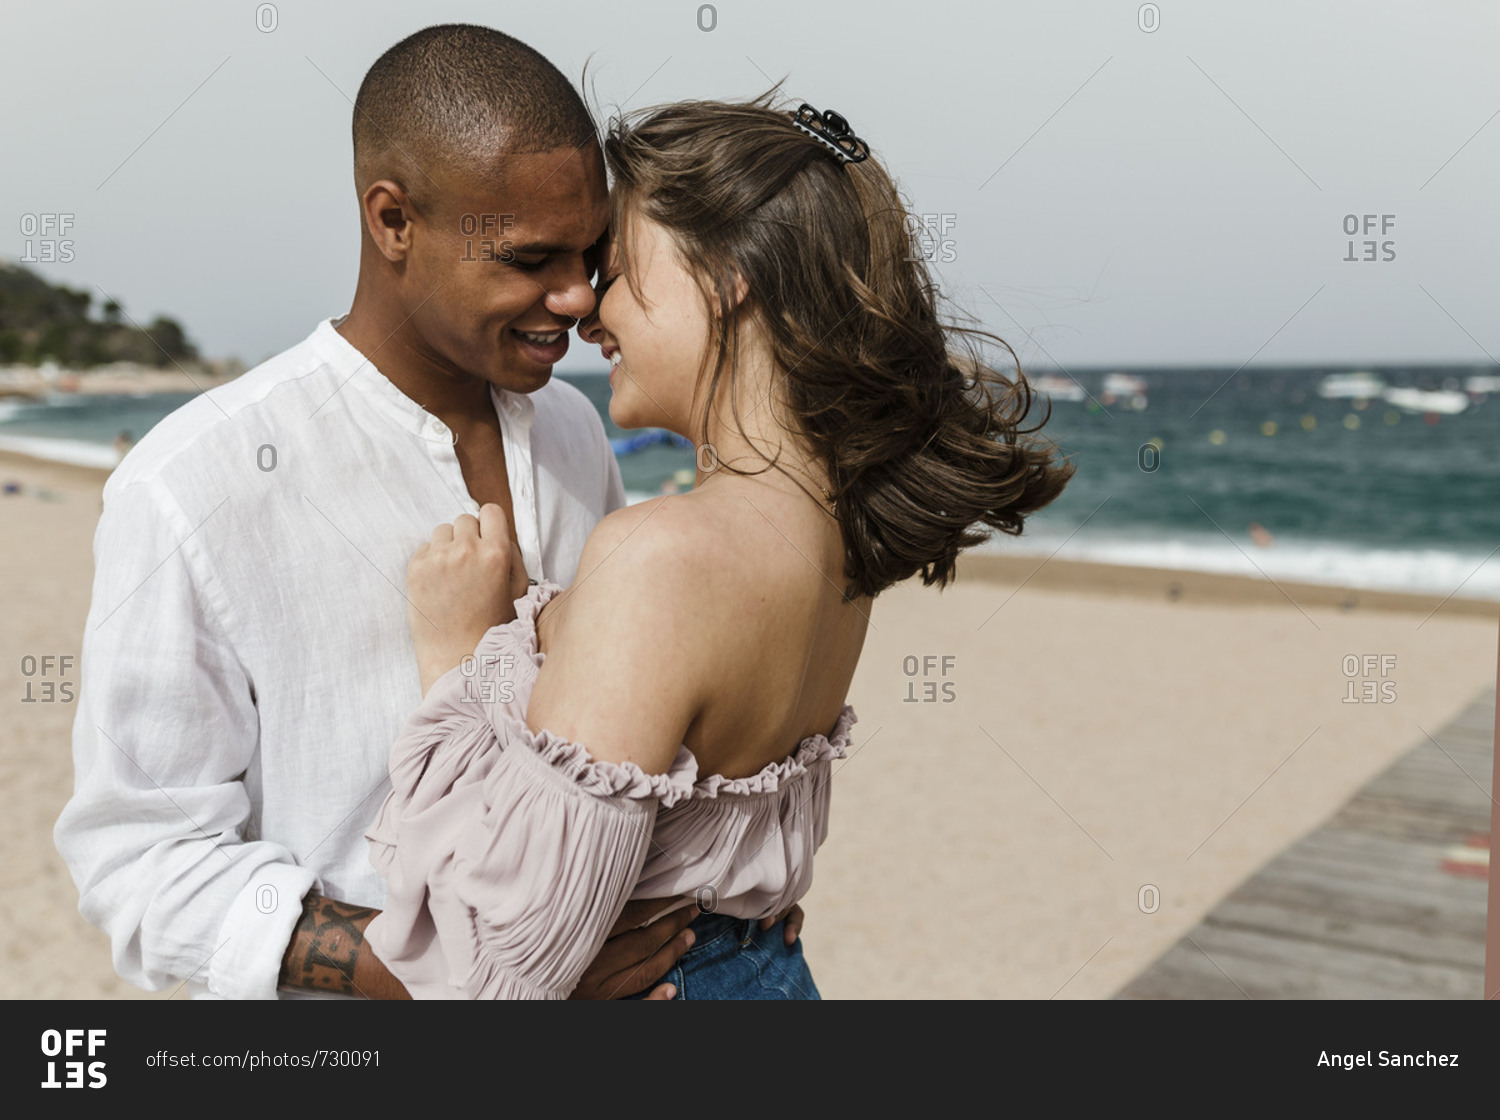 An interracial couple standing on the beach